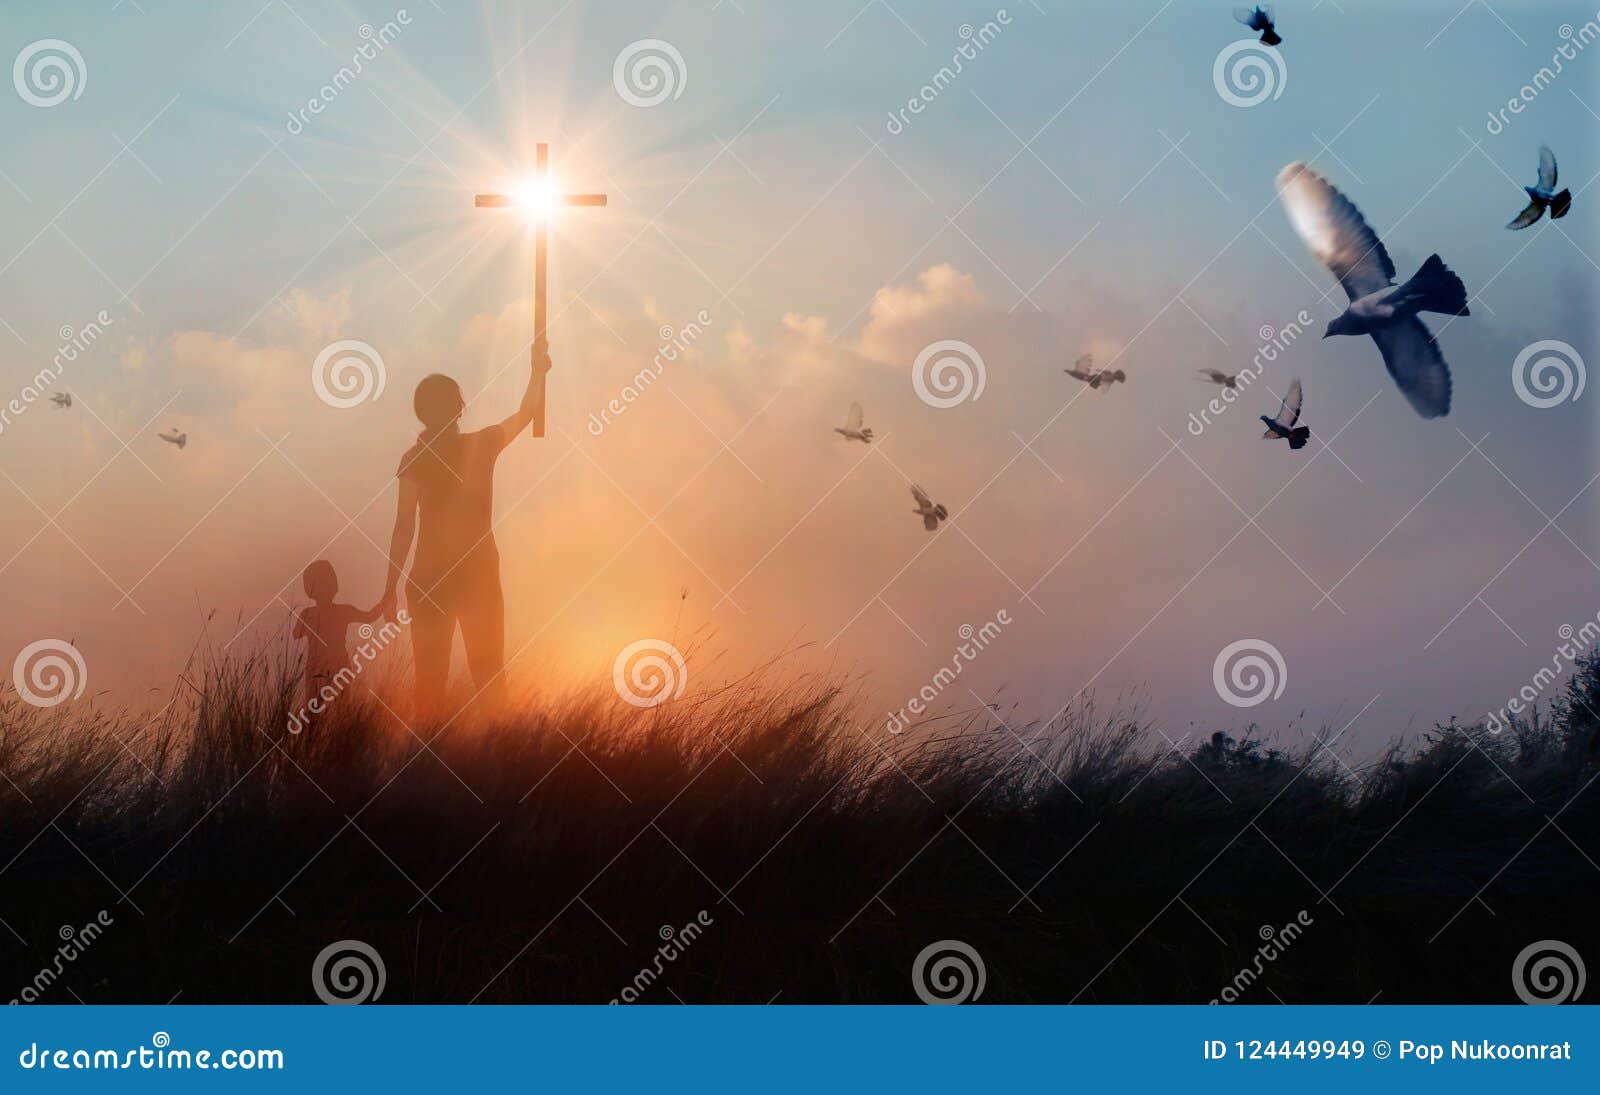 silhouette of mother and son christian prayers raising cross while praying to the jesus on sunset background, worship concept